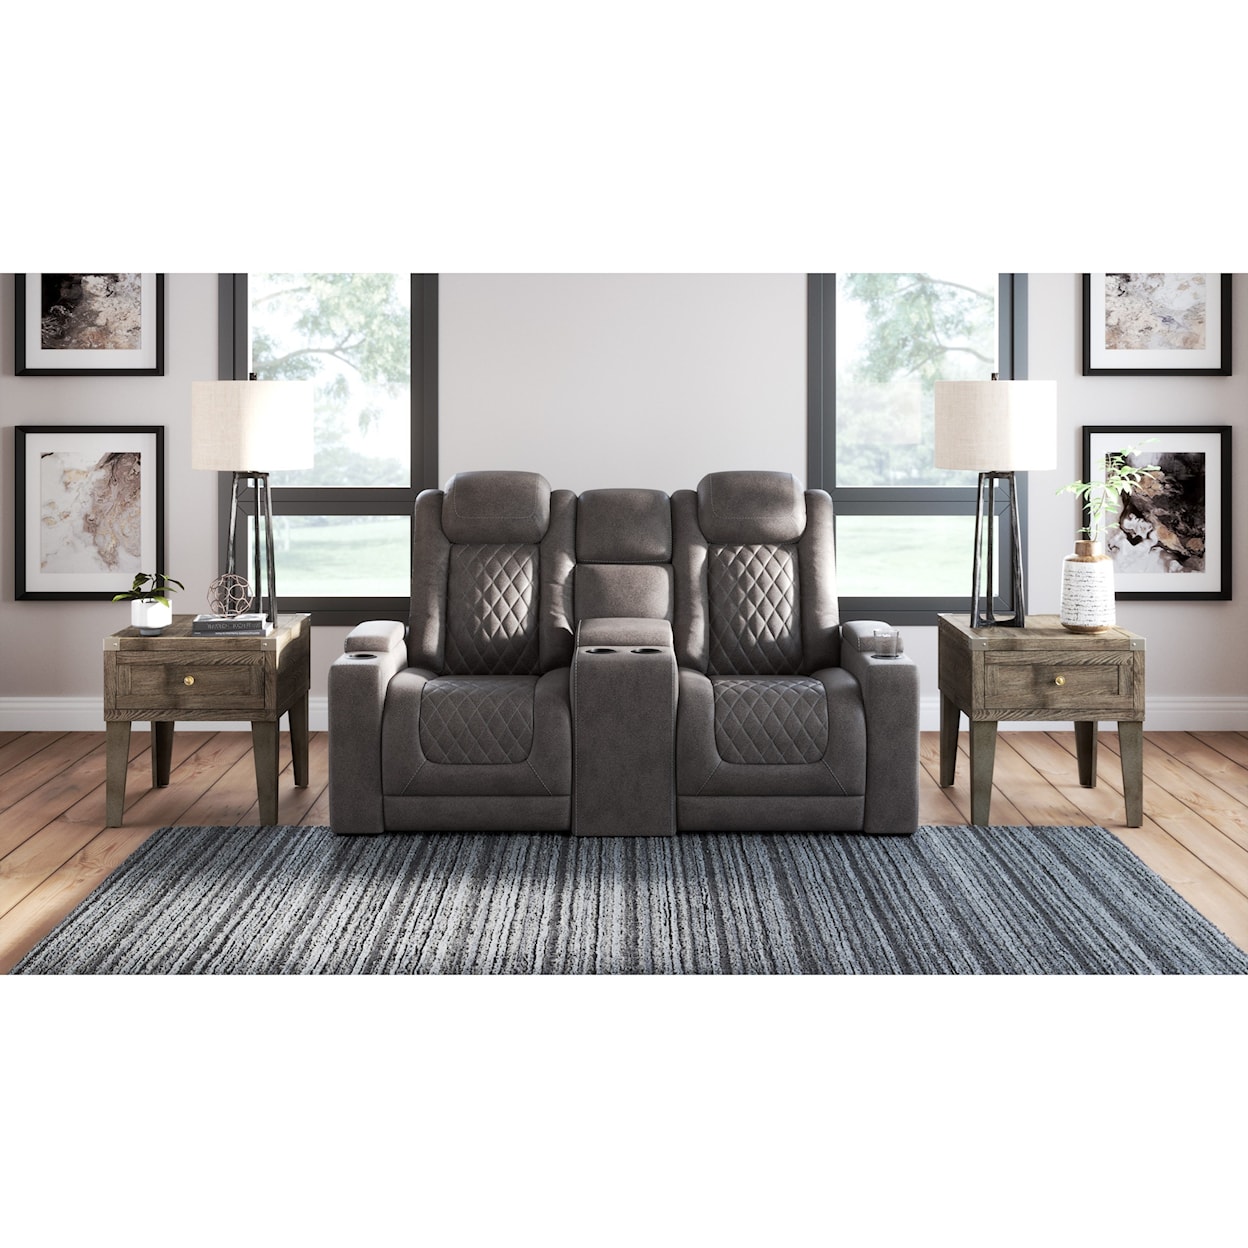 Ashley Furniture Signature Design Hyllmont Pwr Rec Loveseat with Console and Adj Hdrsts